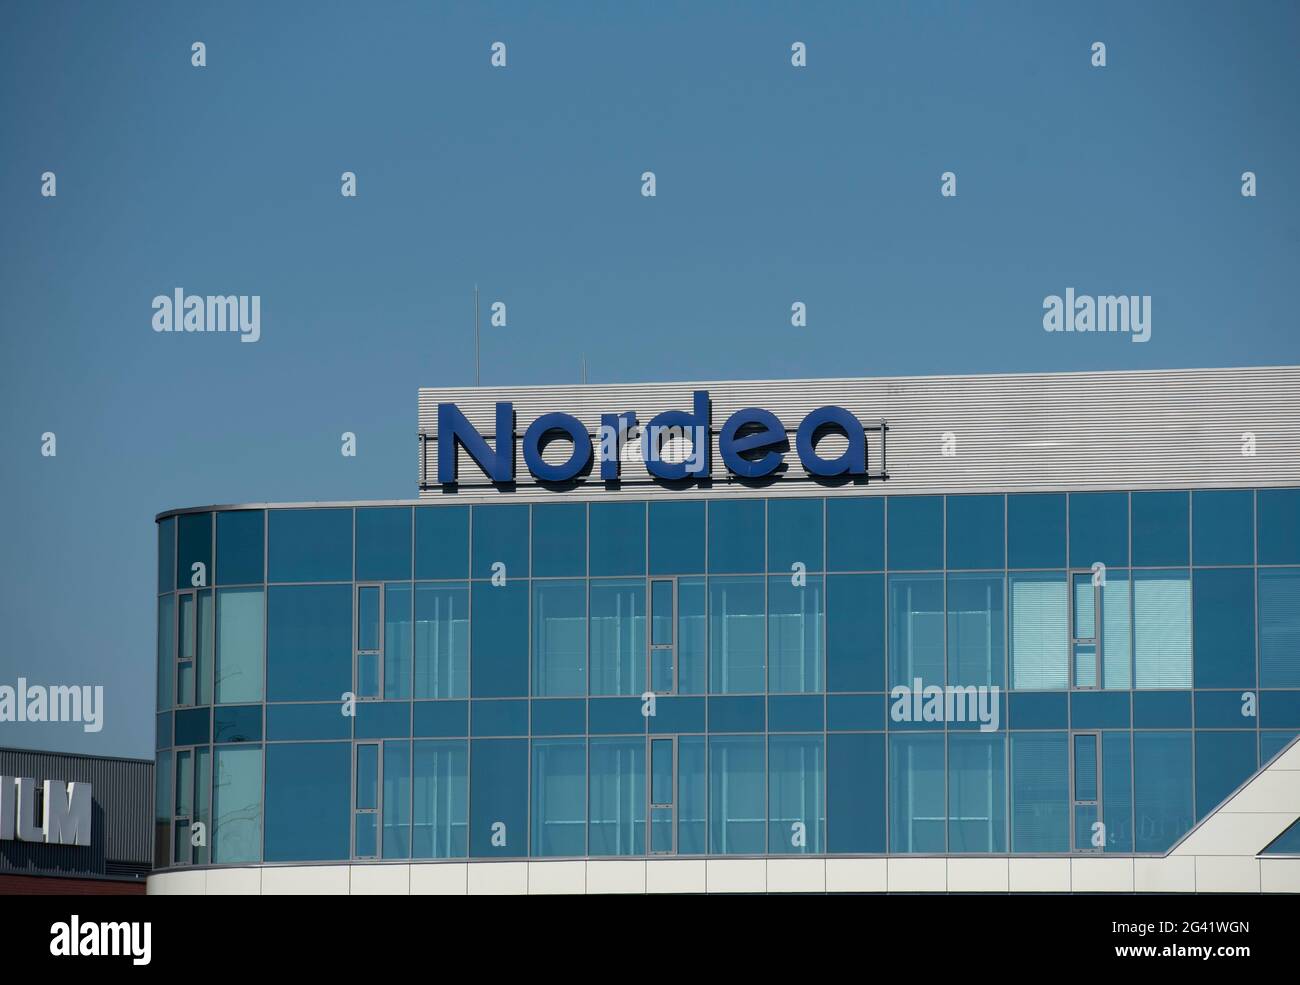 Warsaw, Poland. 18th June, 2021. Nordea Bank Abp, commonly referred to as Nordea, is a European financial services group operating in northern Europe headquartered in Helsinki, Finland sign is pictured on June 18, 2021 in Warsaw, Poland. Credit: Aleksander Kalka/ZUMA Wire/Alamy Live News Stock Photo